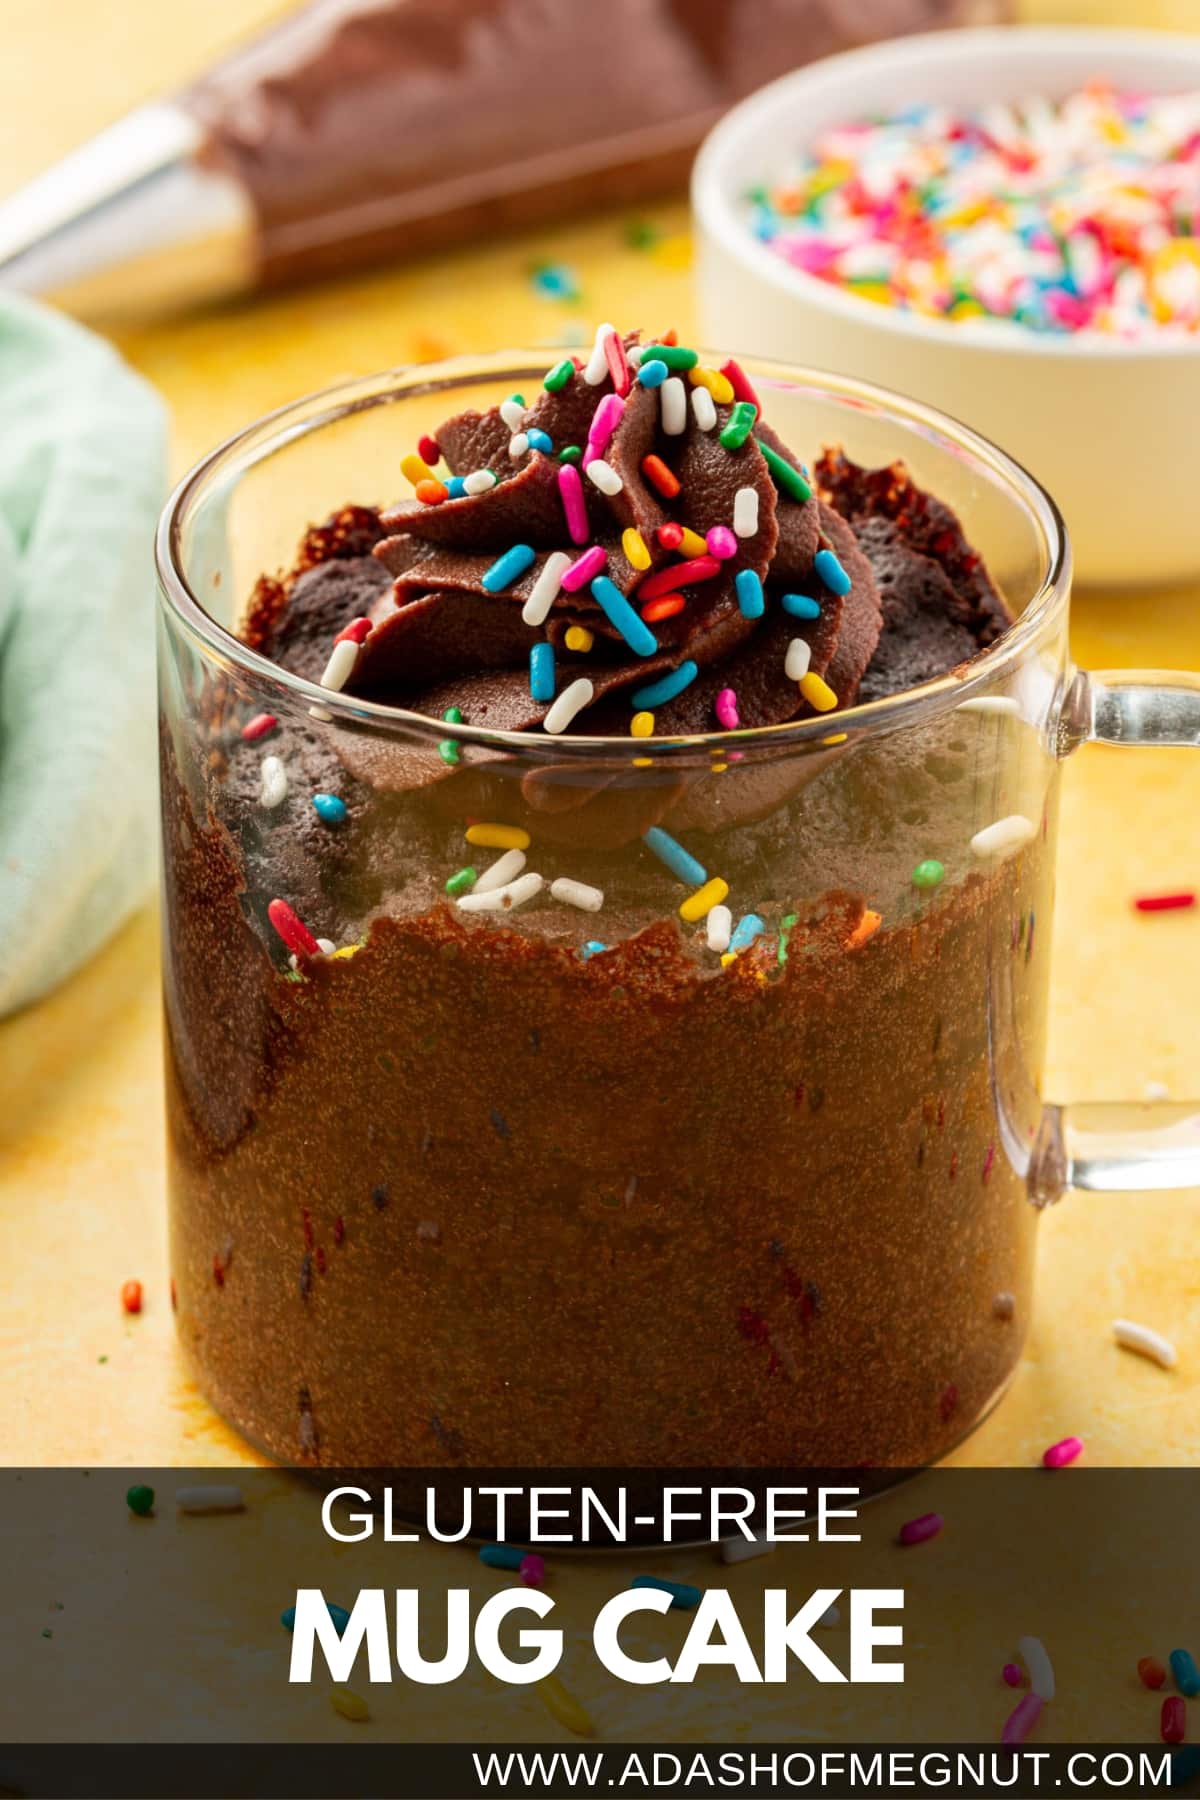 A gluten-free chocolate mug cake in a glass mug topped with chocolate frosting and rainbow sprinkles.